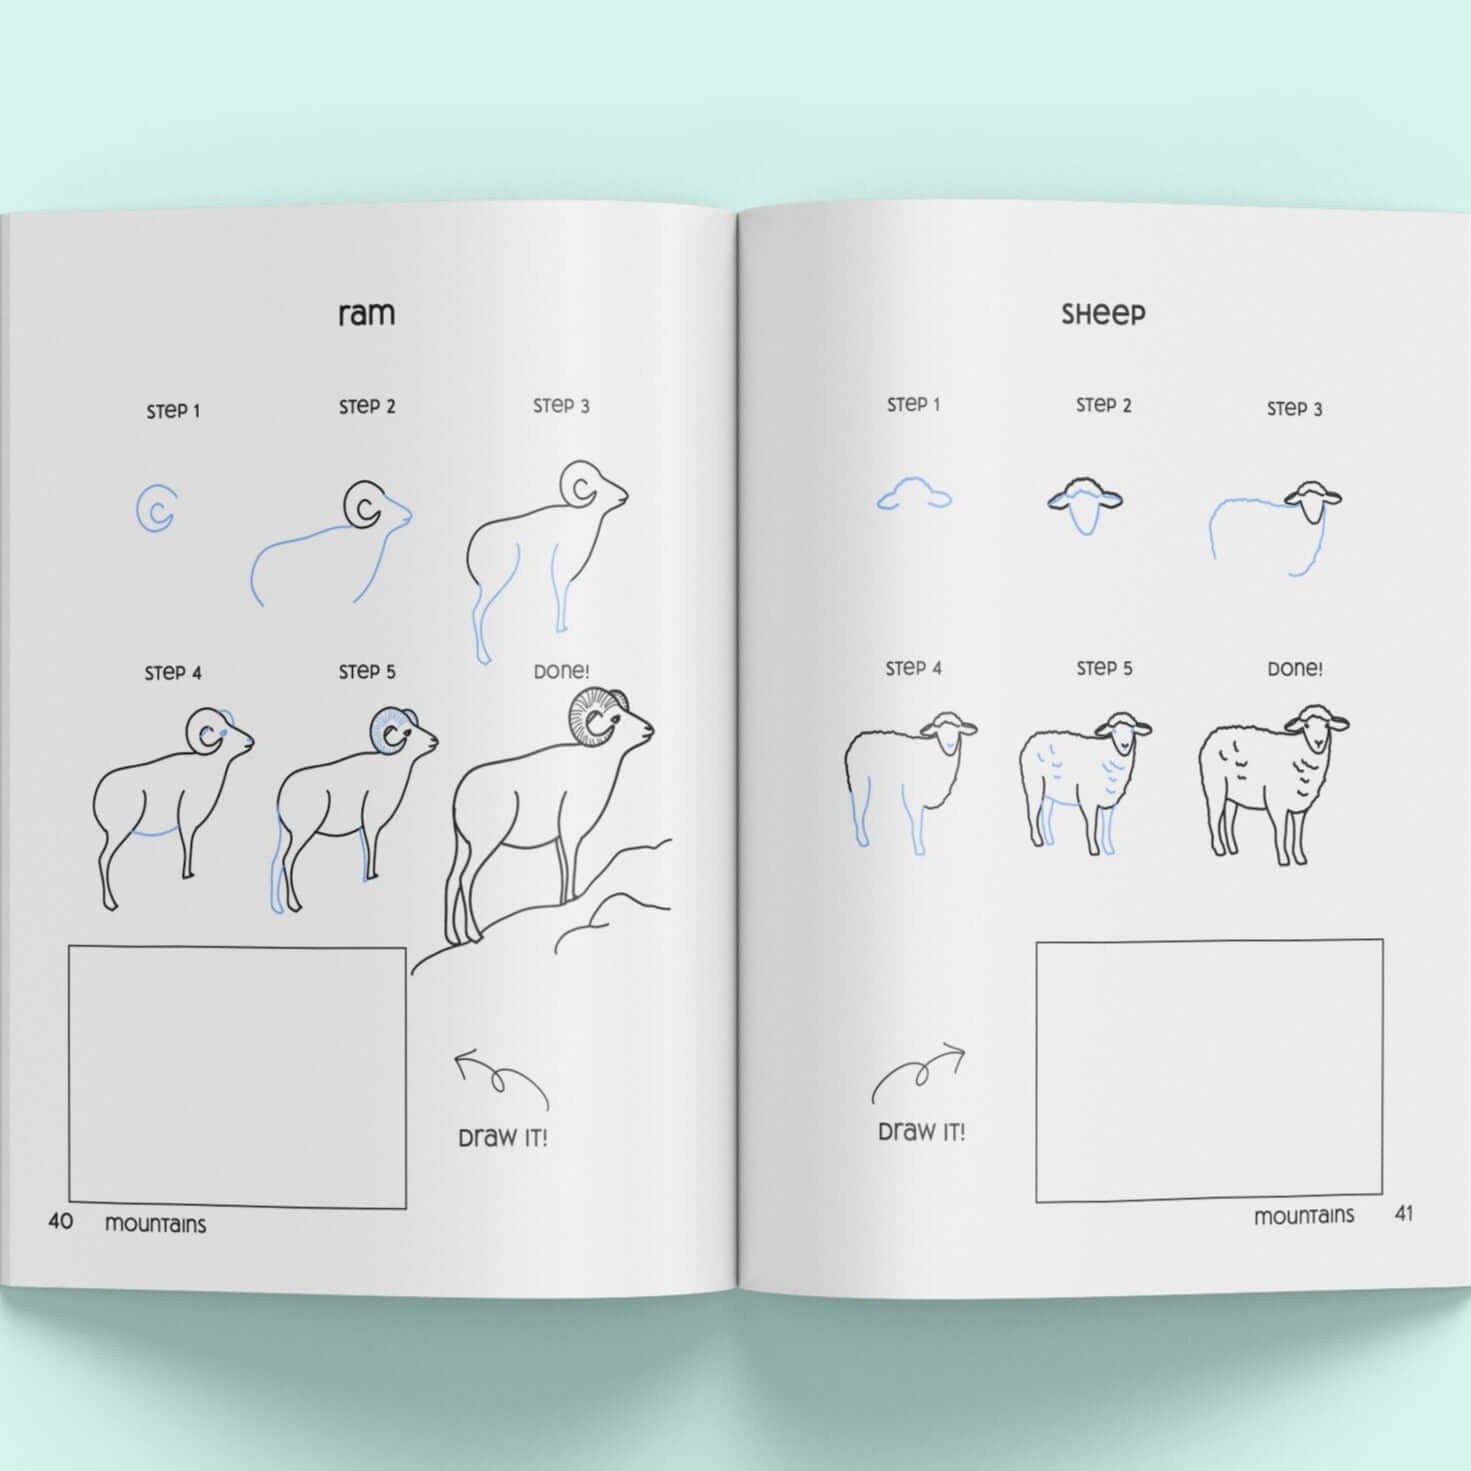 How to draw a sheep with step-by-step instructions